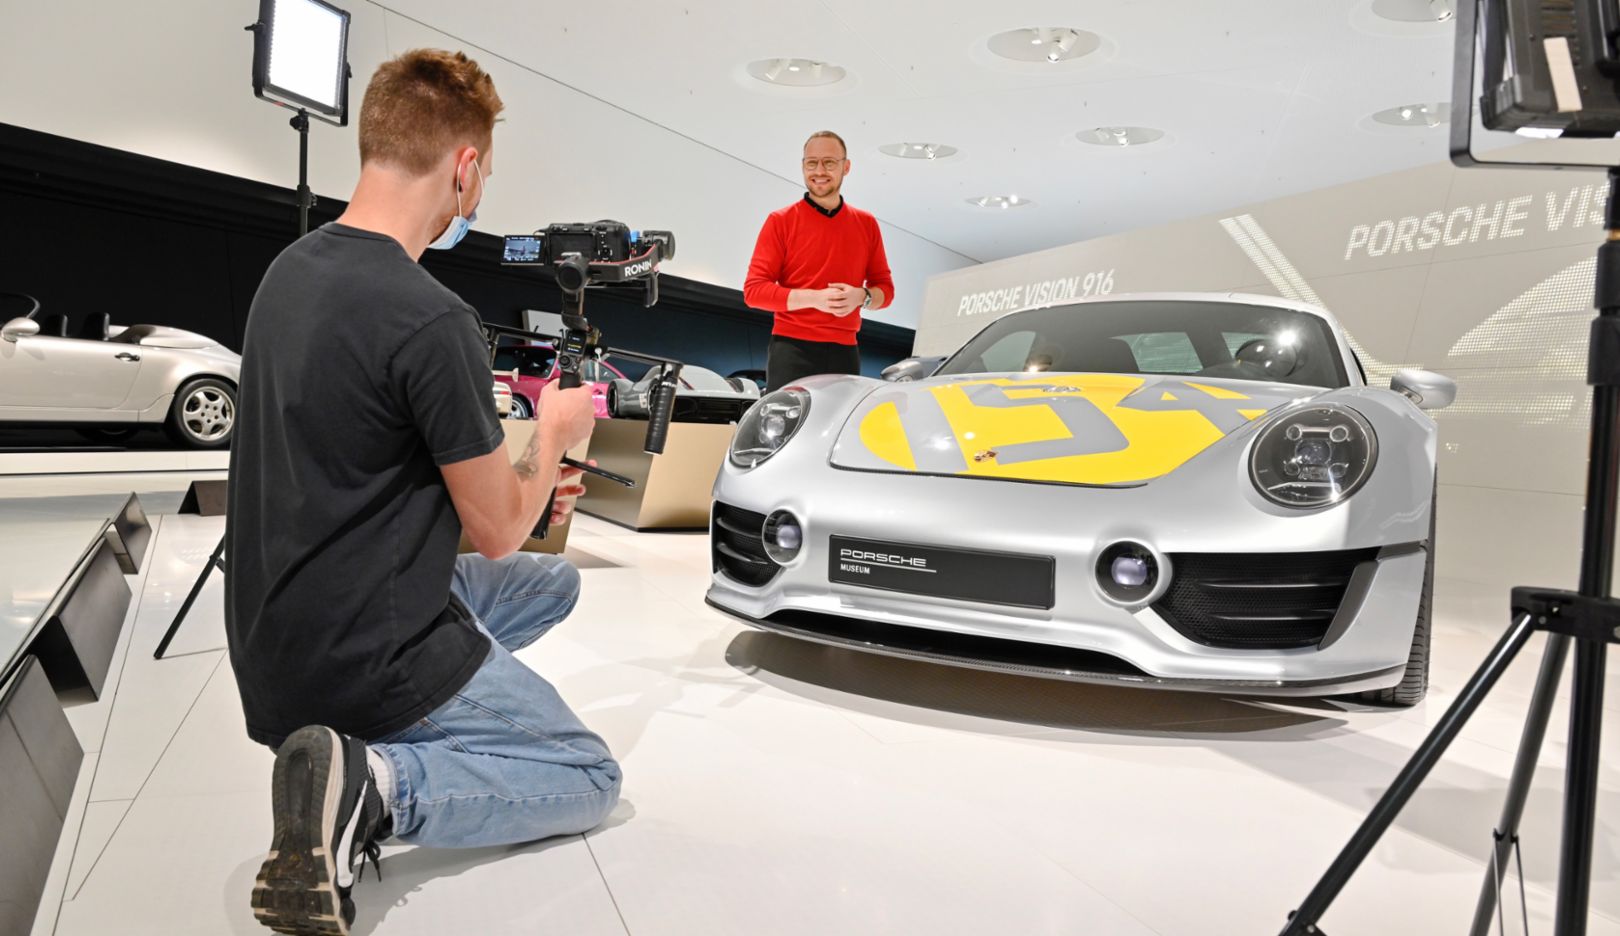 Virtual tour of the special exhibition at the Porsche Museum - Image 1